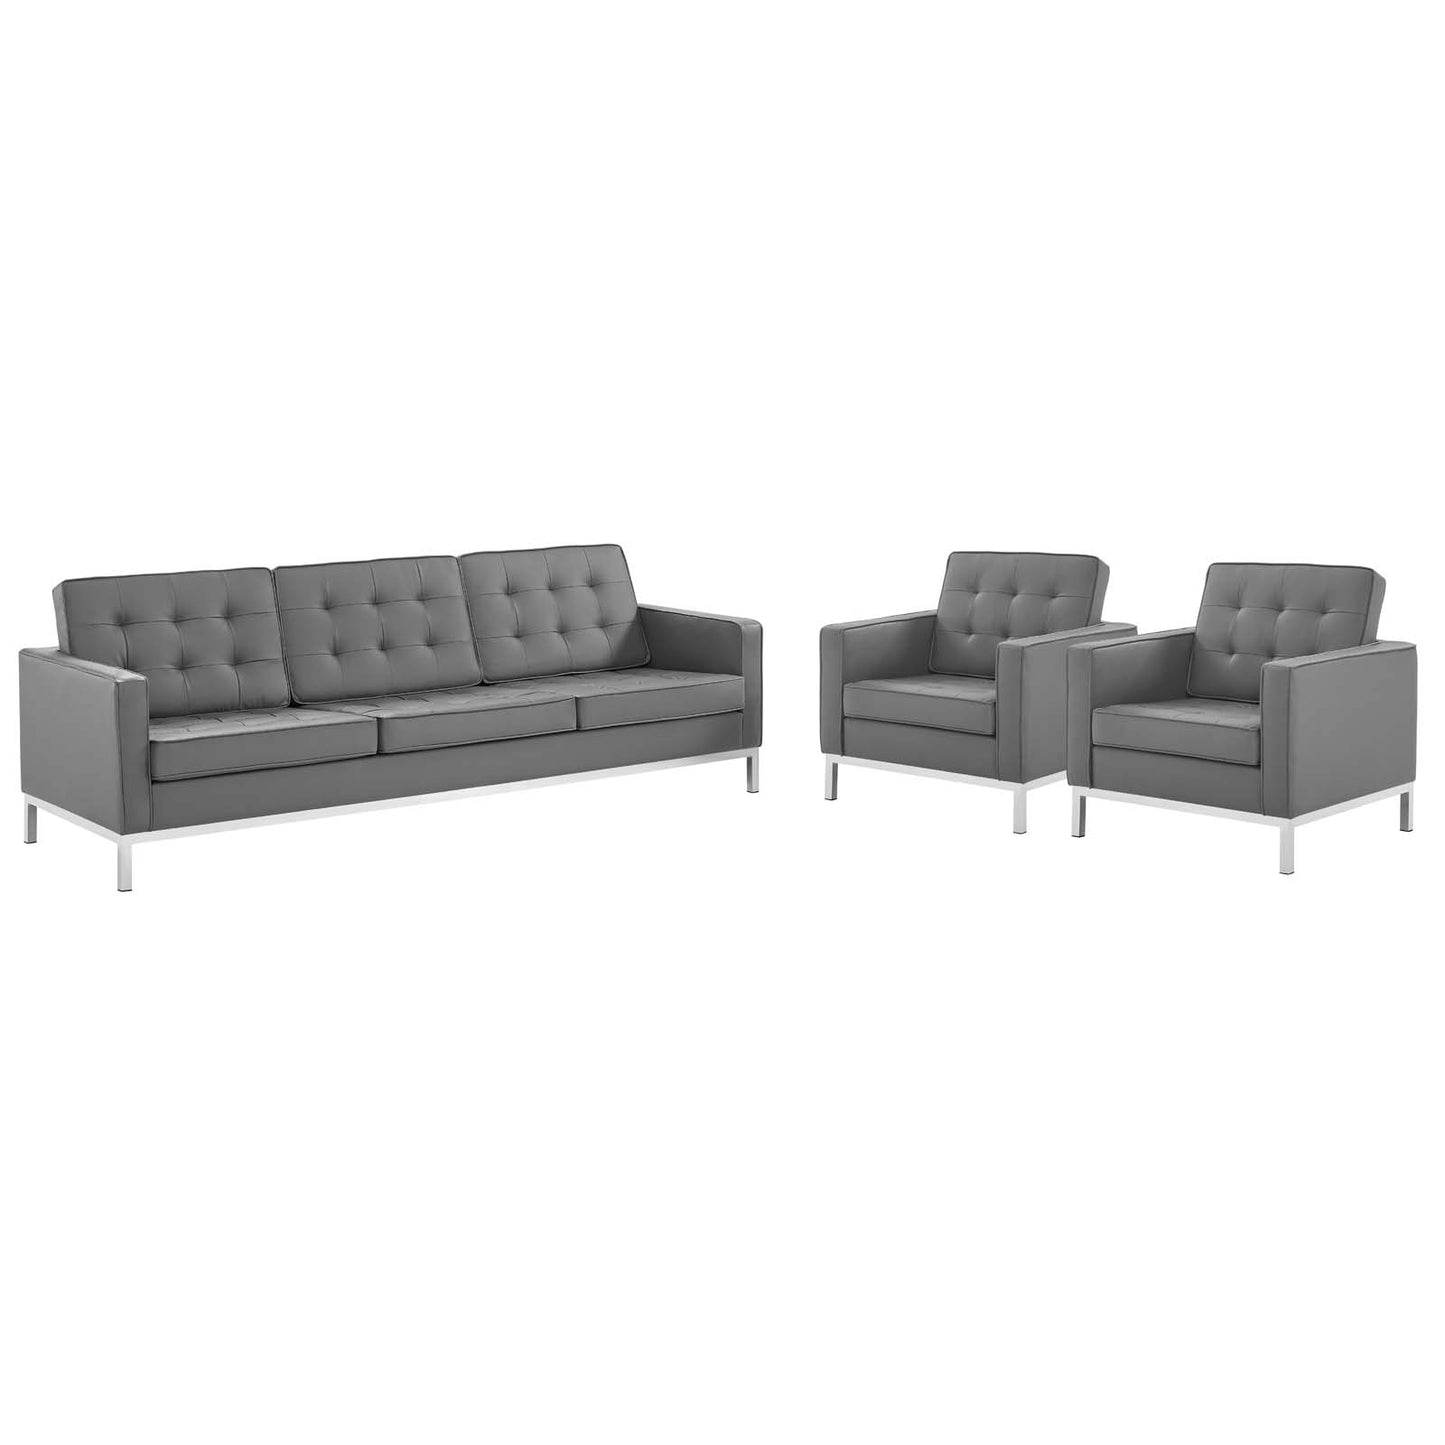 Modway Loft 3 Piece Tufted Upholstered Faux Leather Set - EEI-4105